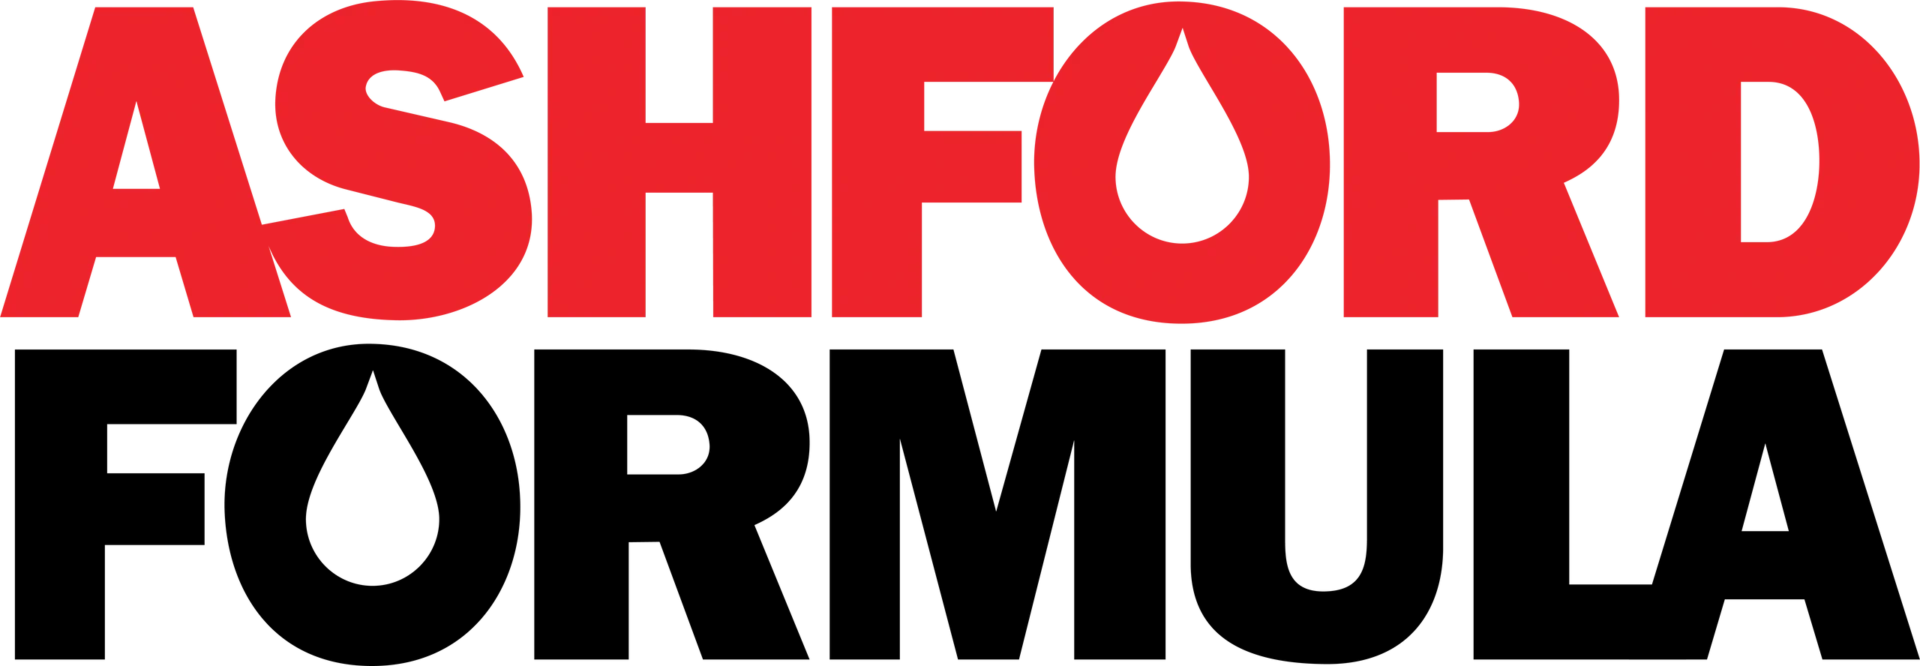 A red and black logo for hbo.